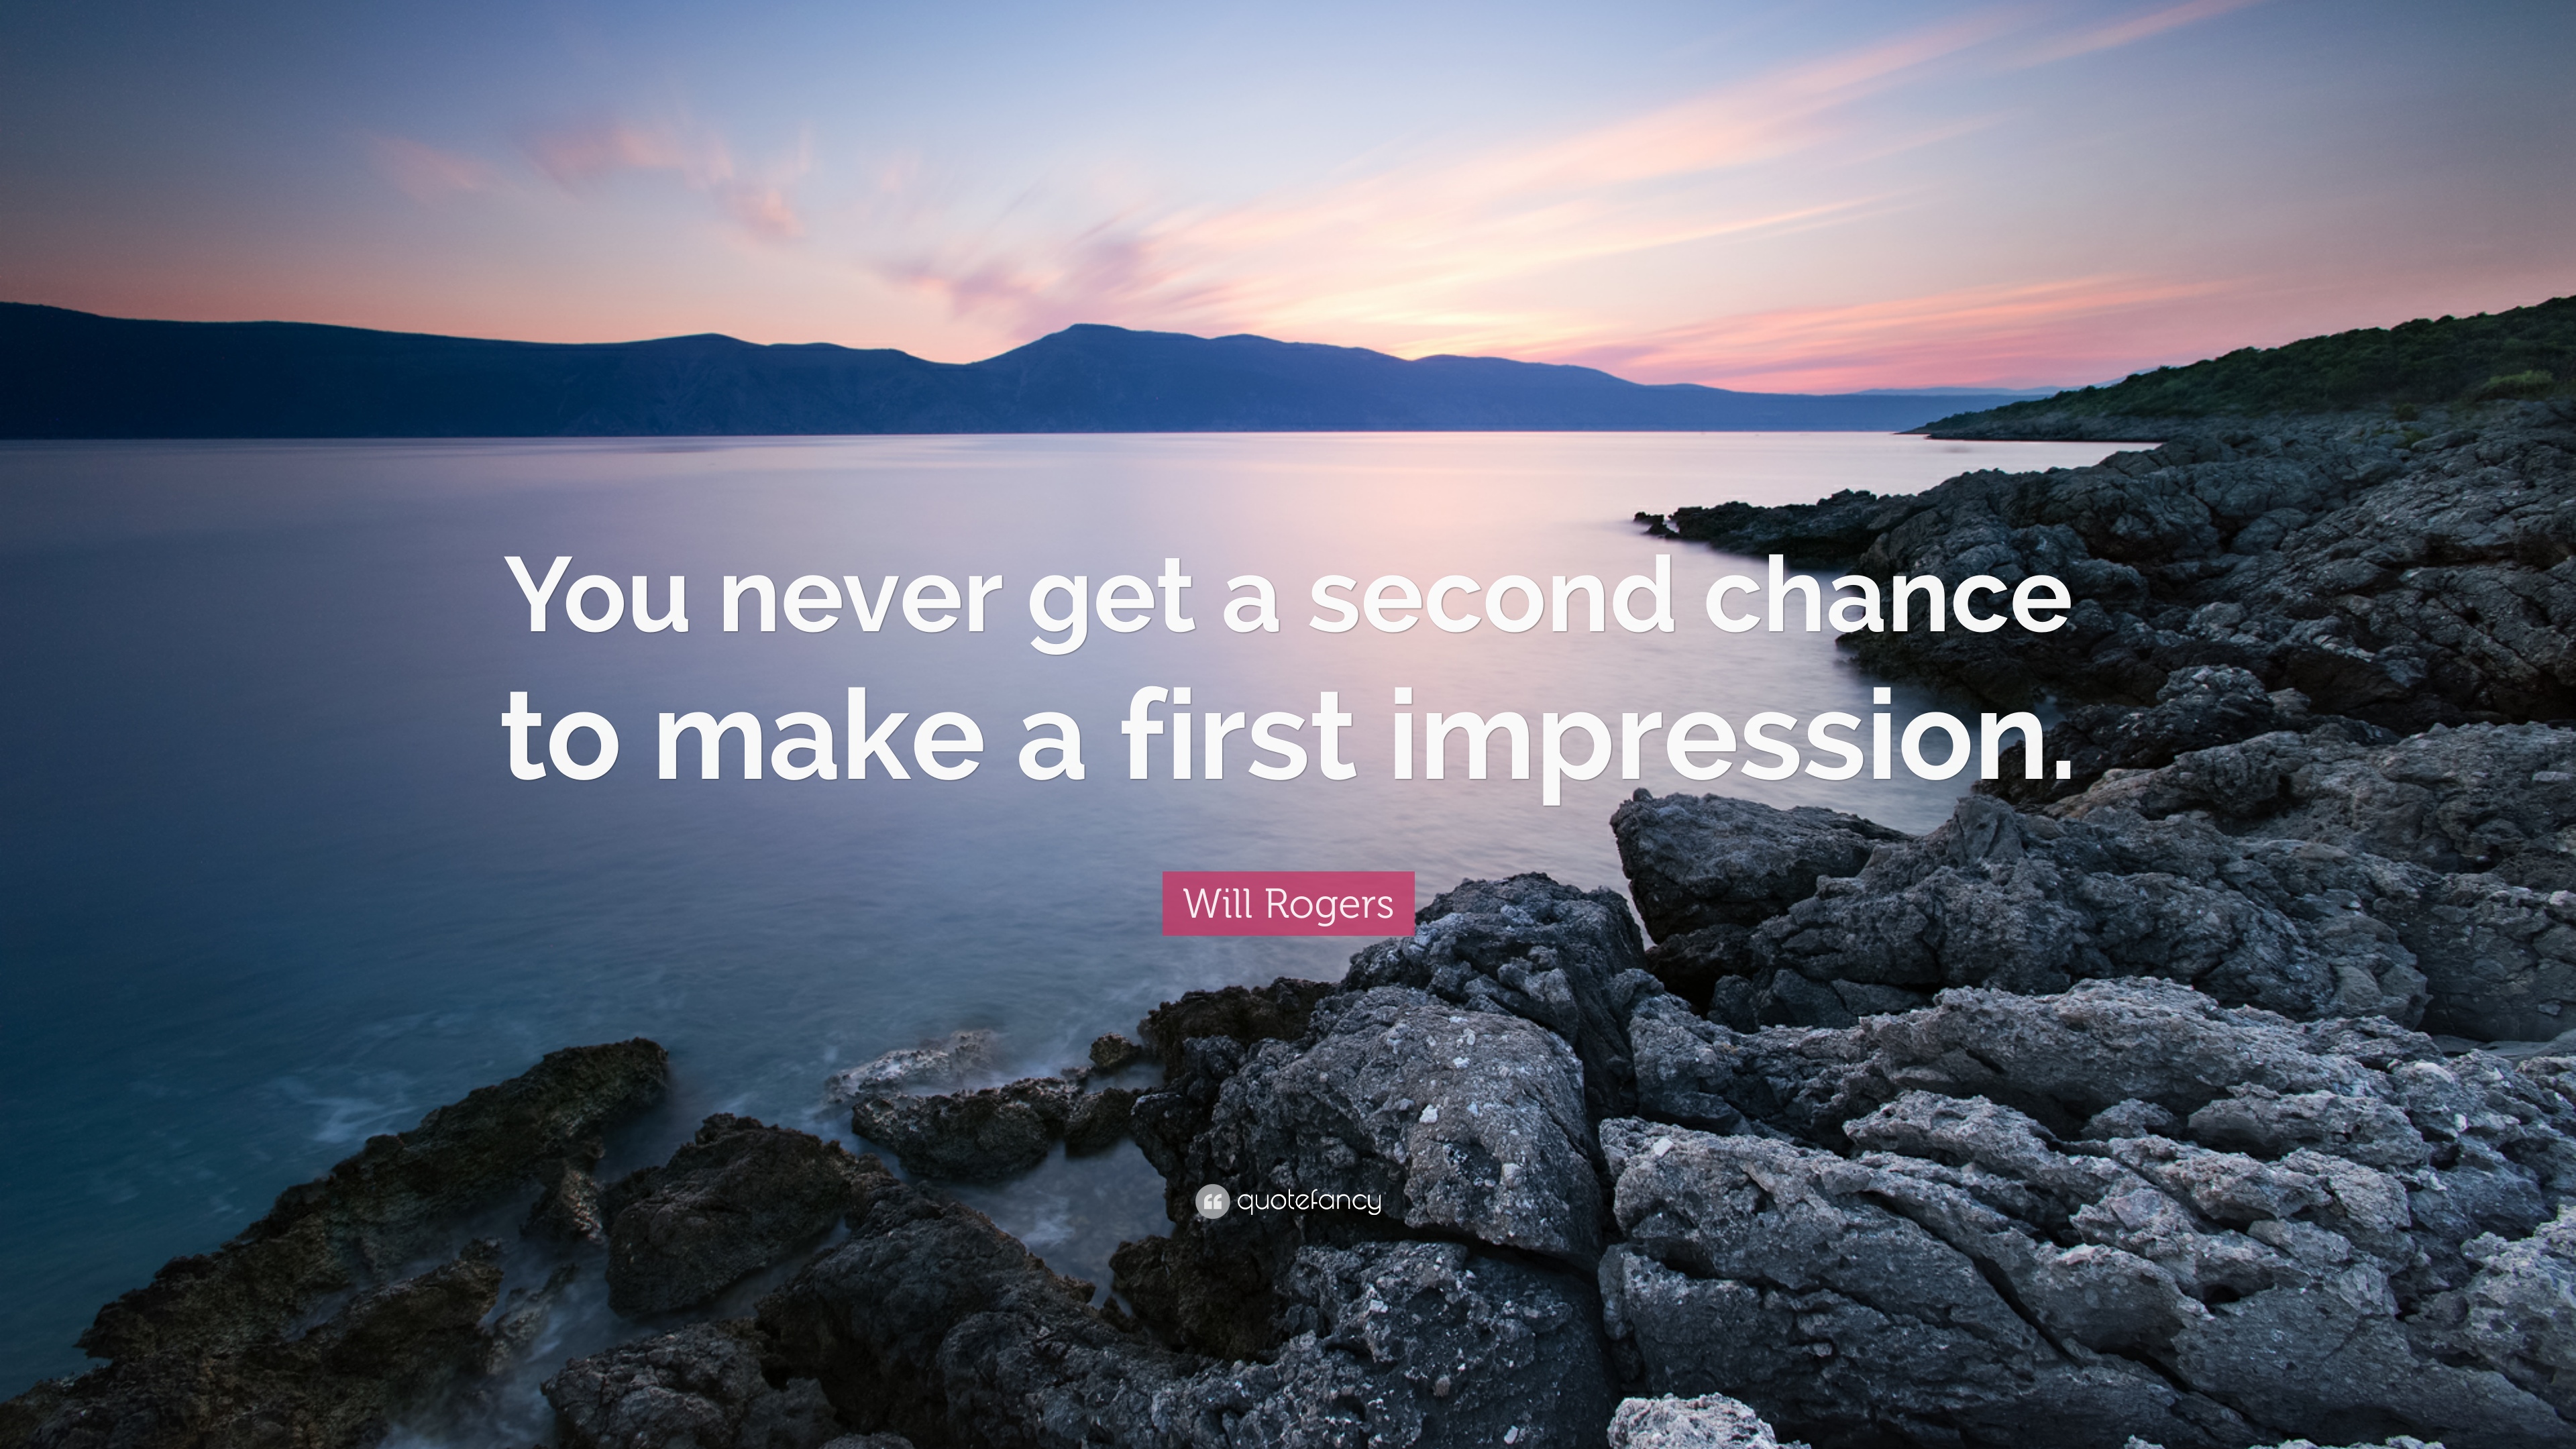 Will Rogers Quote: “You never get a second chance to make a